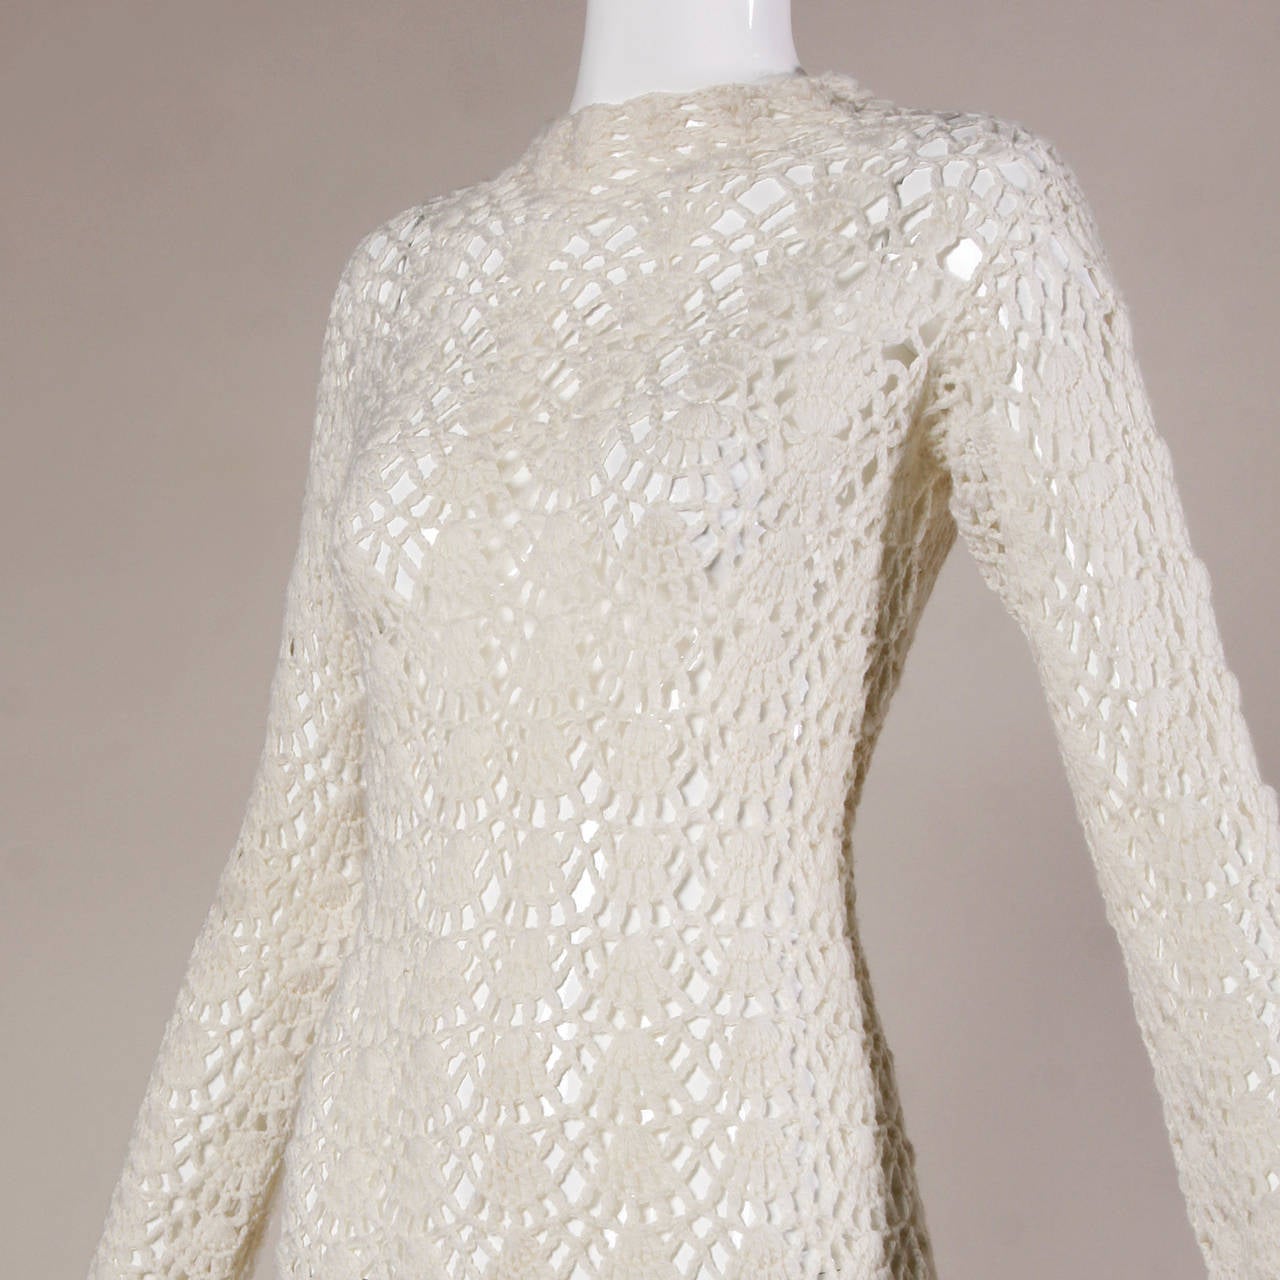 Hand crocheted mini dress with long sleeves and a scalloped design. Completely sheer.

Details:

Unlined
Back Button Closure
Marked Size: Not Marked
Estimated Size: Small-Medium
Color: Ivory
Fabric: Not Marked/ Feels Like